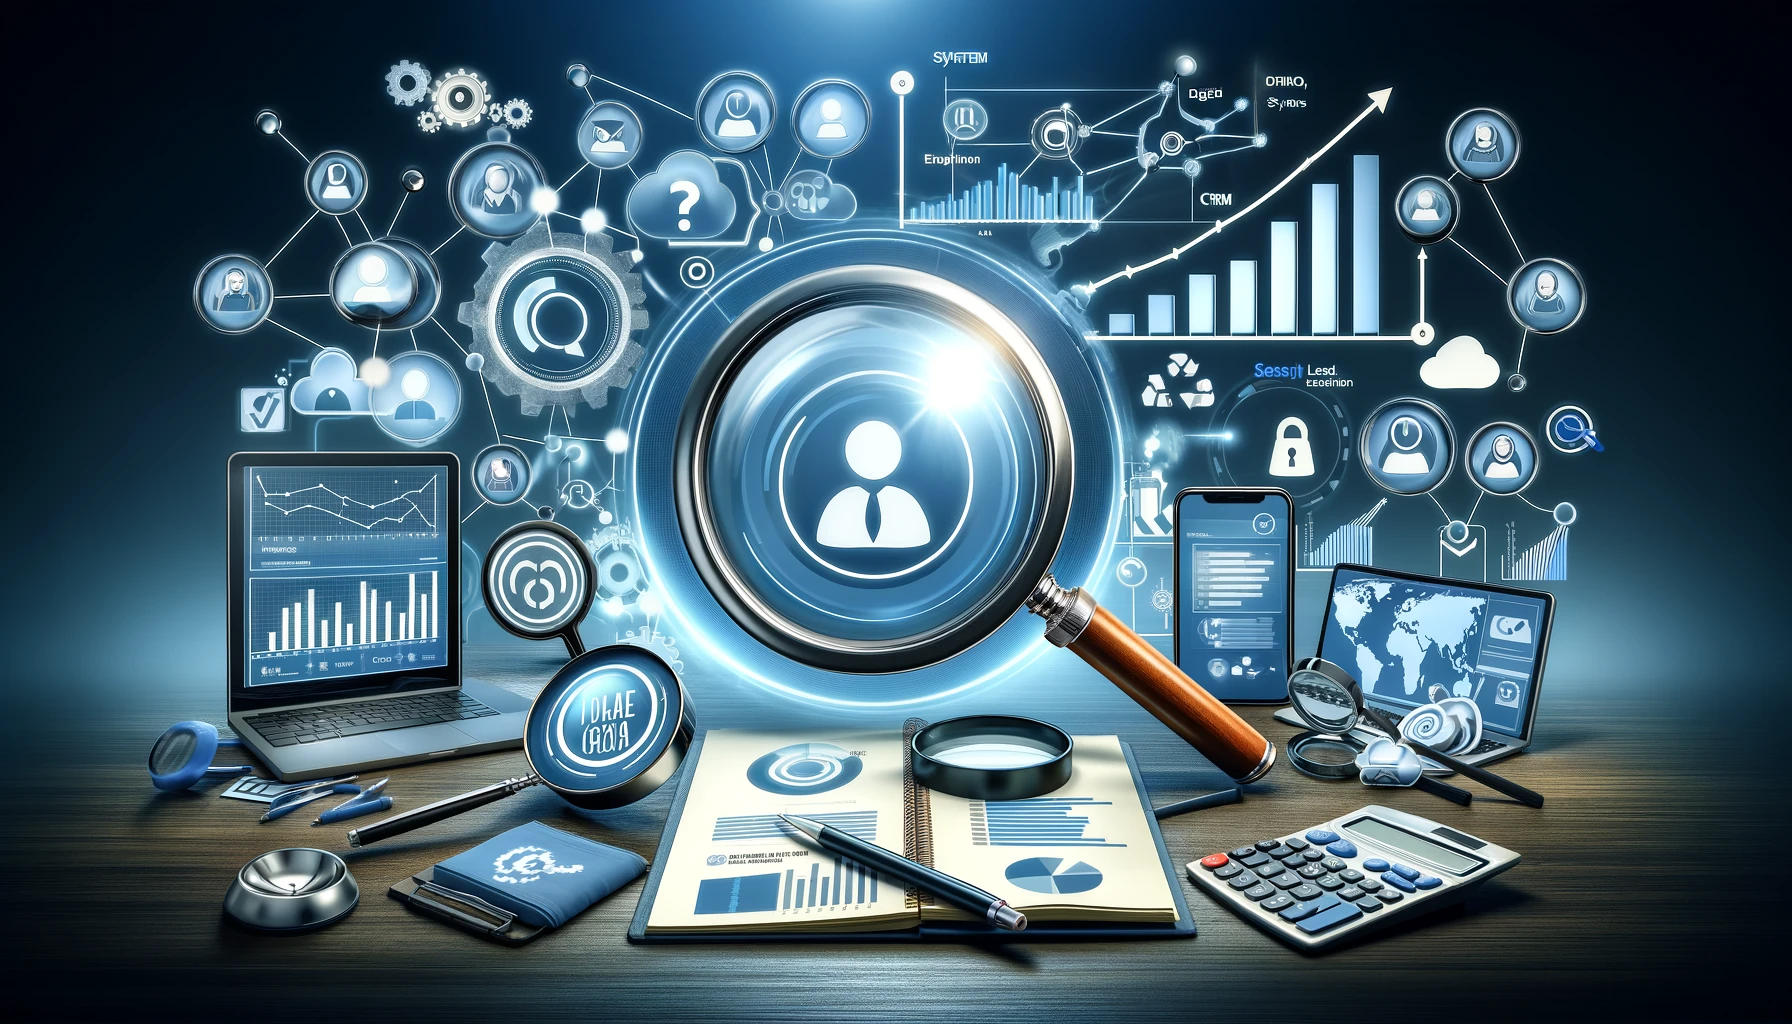 Wide image showcasing Lead Generation Tools with a magnifying glass over a target audience, CRM systems, and analytics graphs, depicting the strategic engagement with potential customers.